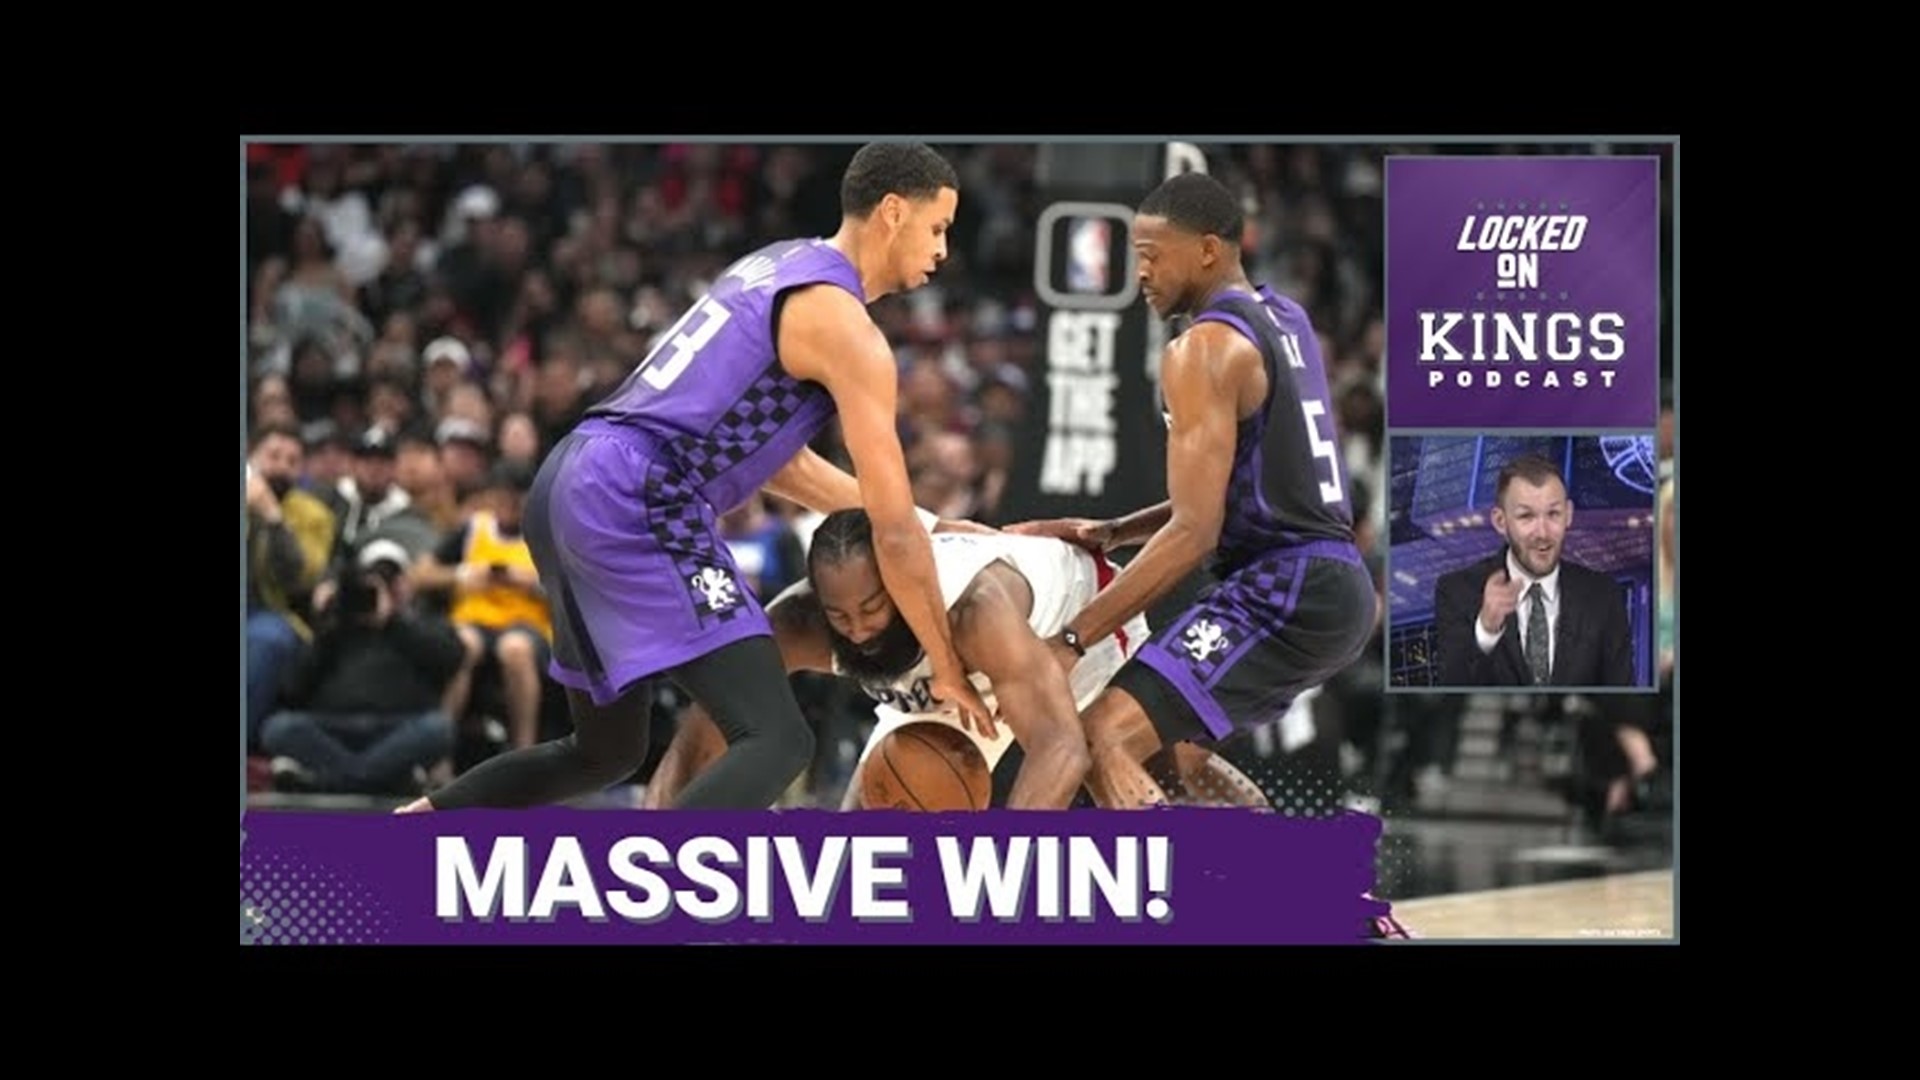 Matt George reacts to the Sacramento Kings' huge win in Los Angeles, that vaulted them all the way up to 5th place in the West.